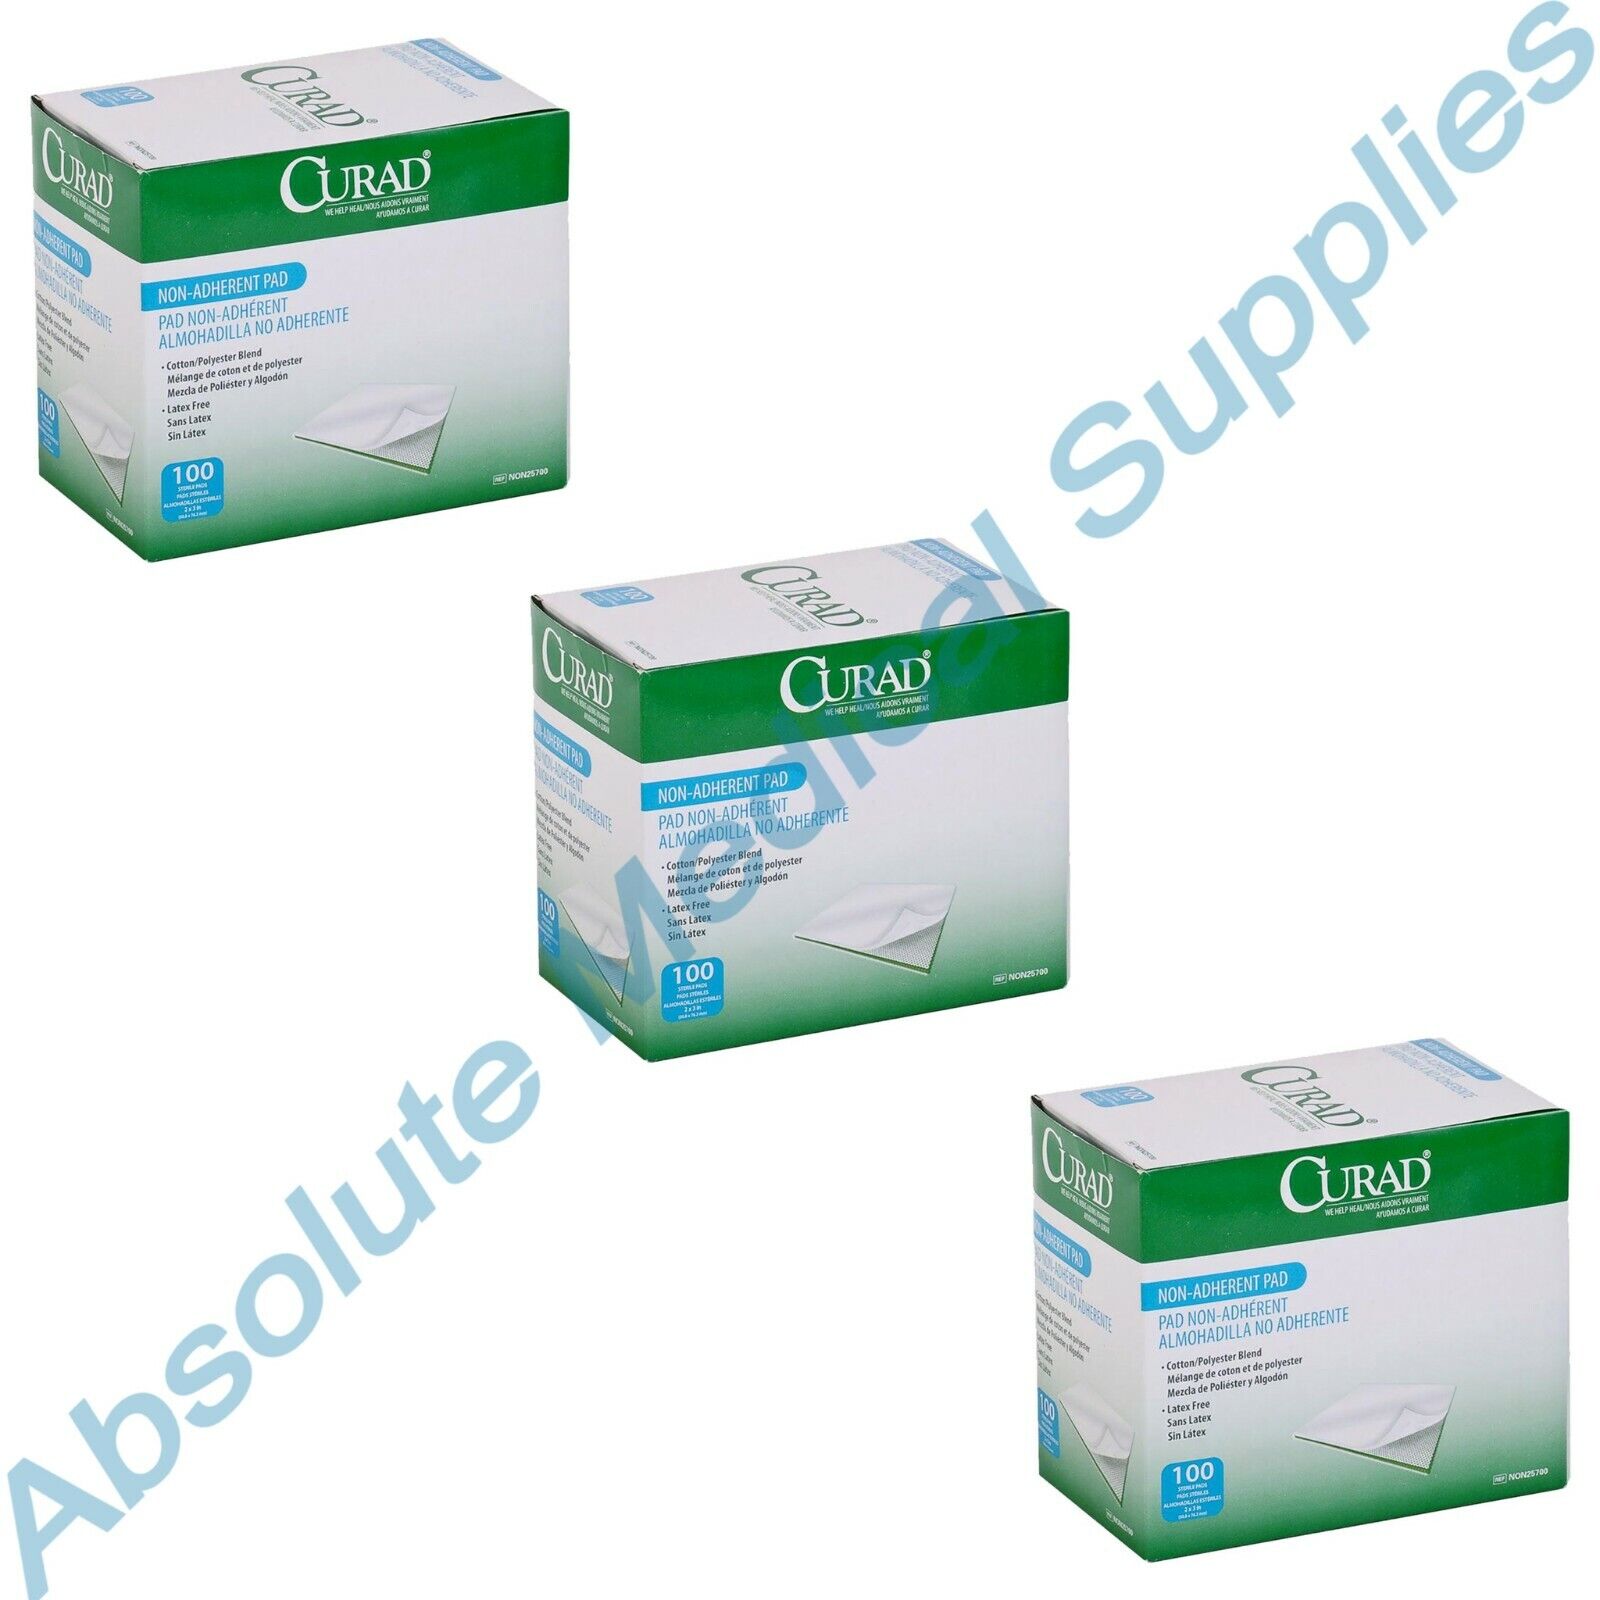 *300-Pack* Medline Curad Non-Adherent Pad 2" x 3" Sterile Pads NON25700 Medline NON25700